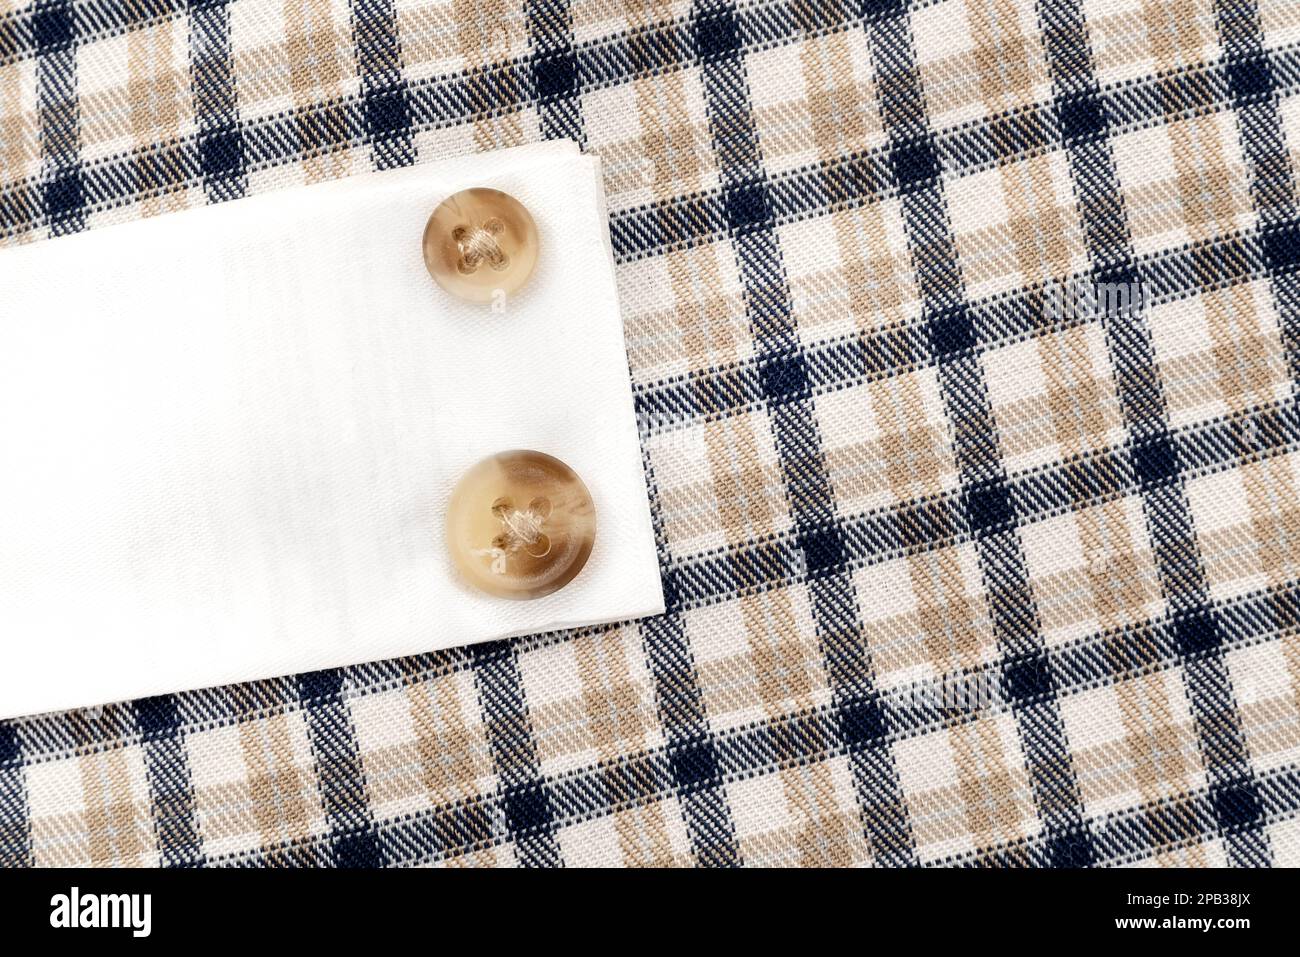 Buttons on a plaid shirt. Spare buttons sewn to the shirt Stock Photo